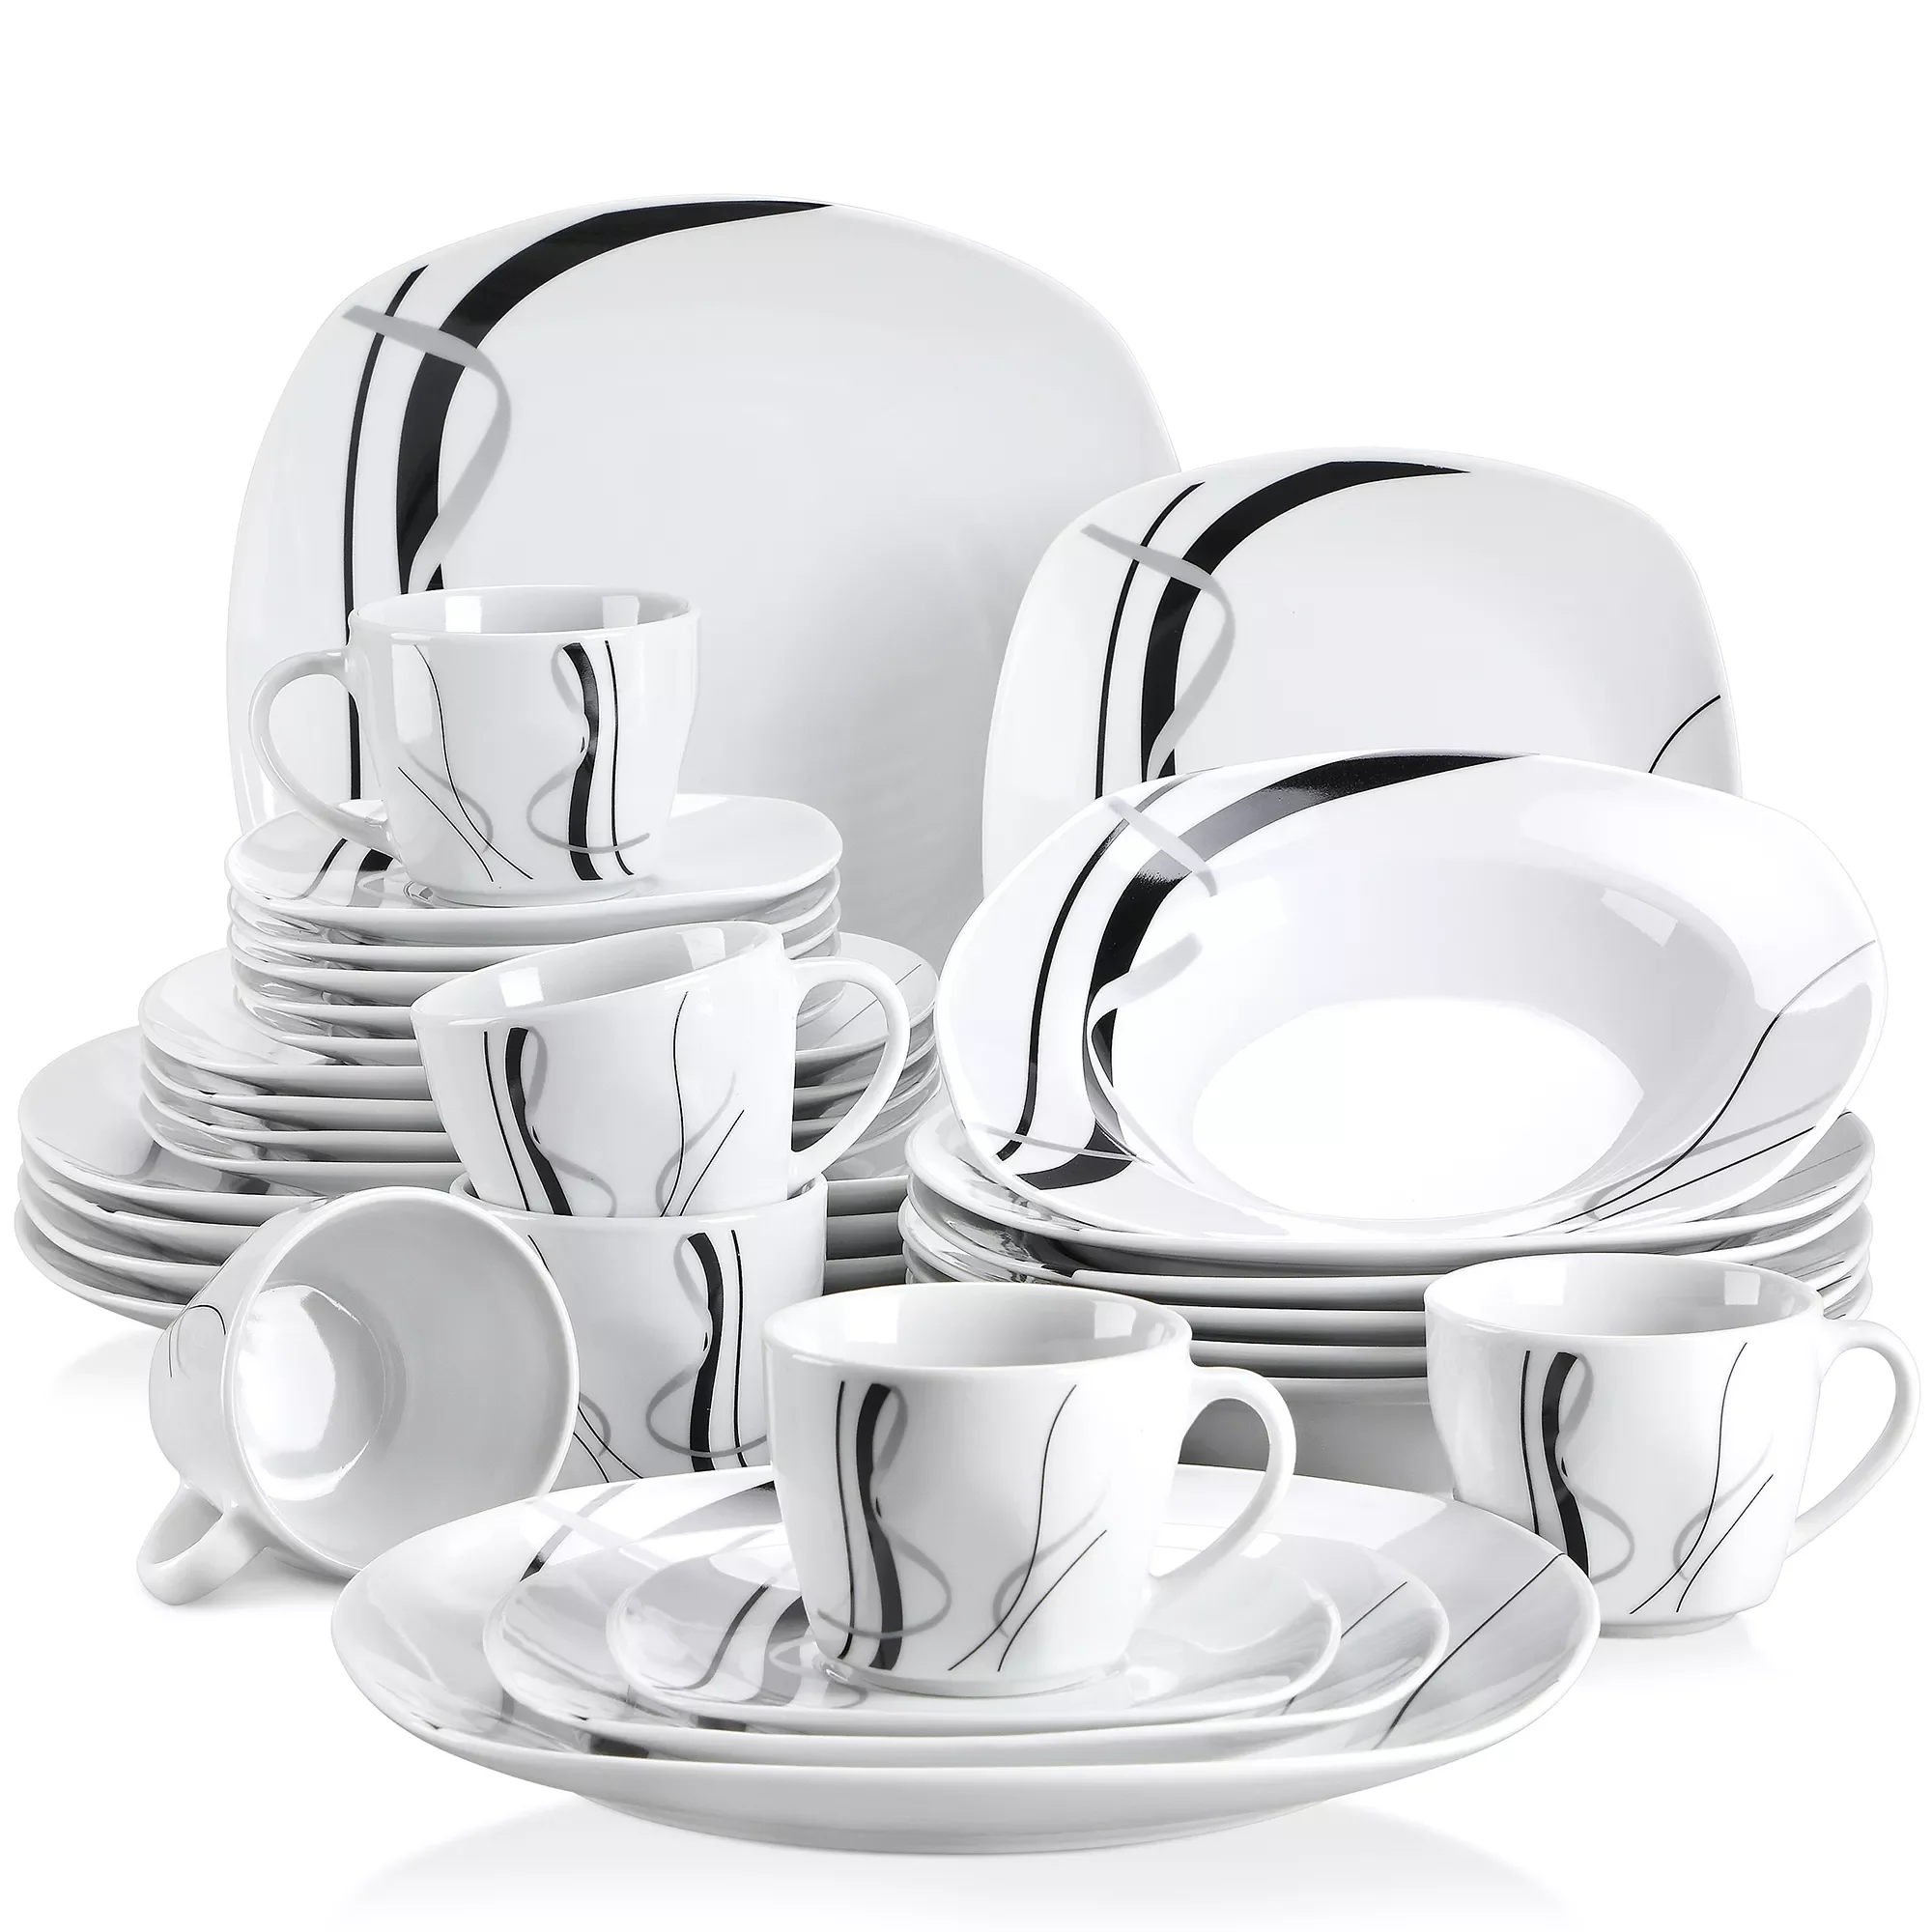 

VEWEET FIONA 30/60 Piece Black Lines Porcelain Ceramic Tableware Set with Dessert Plates/Soup Plates/Dinner Plates/Cups/Saucers